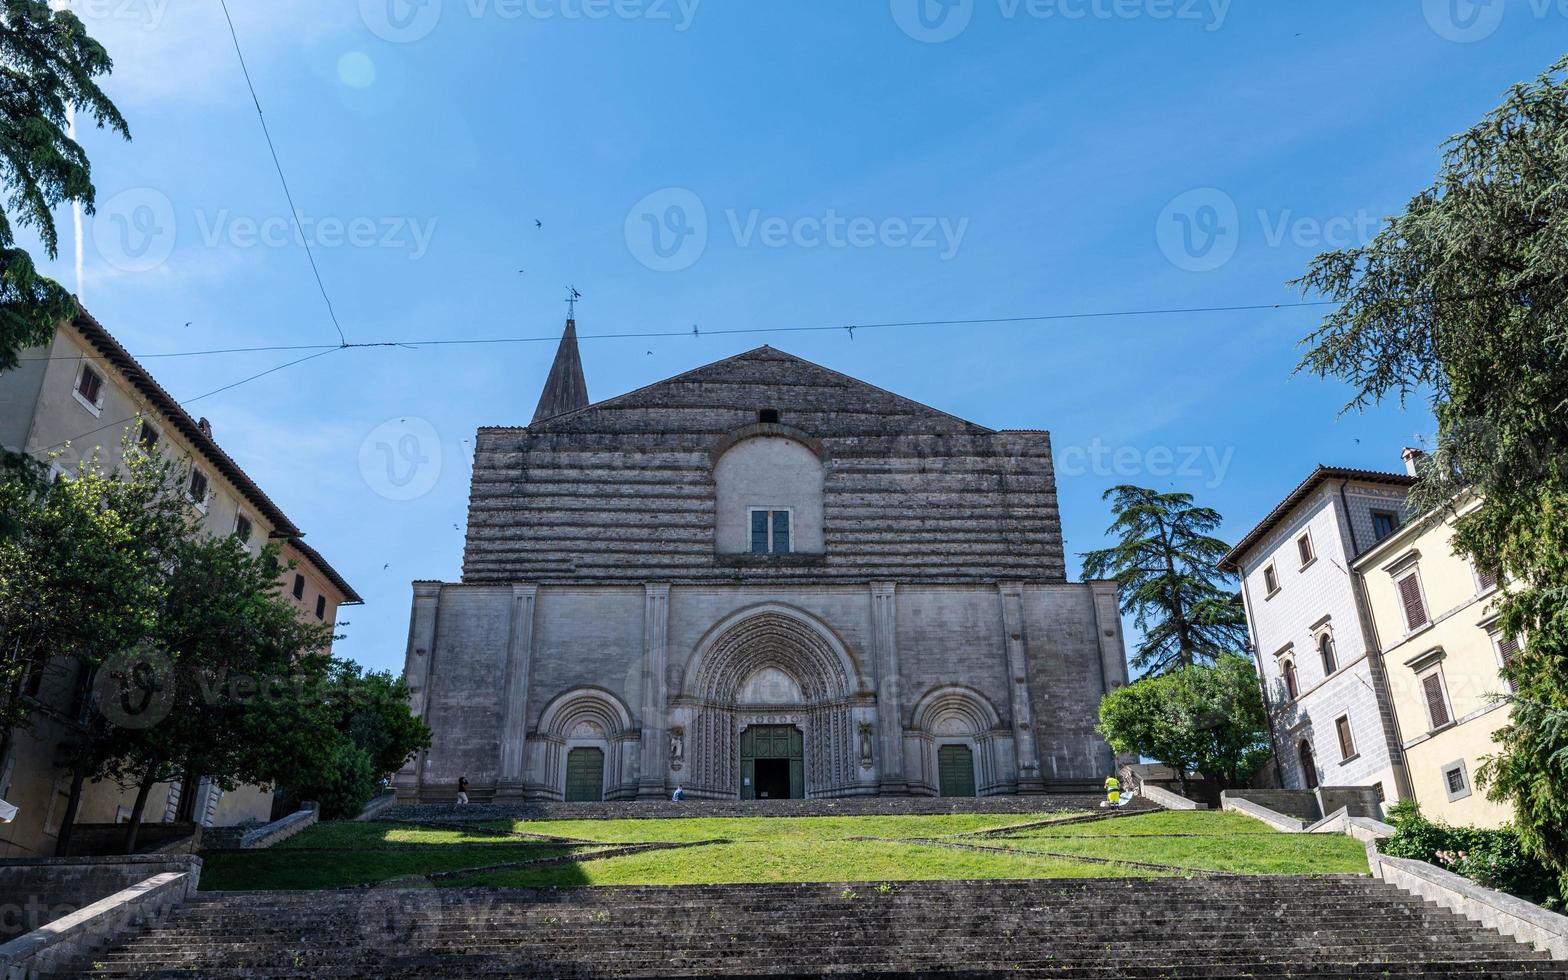 Todi Church of San Fortunato just inside the town of Todi, Italy photo